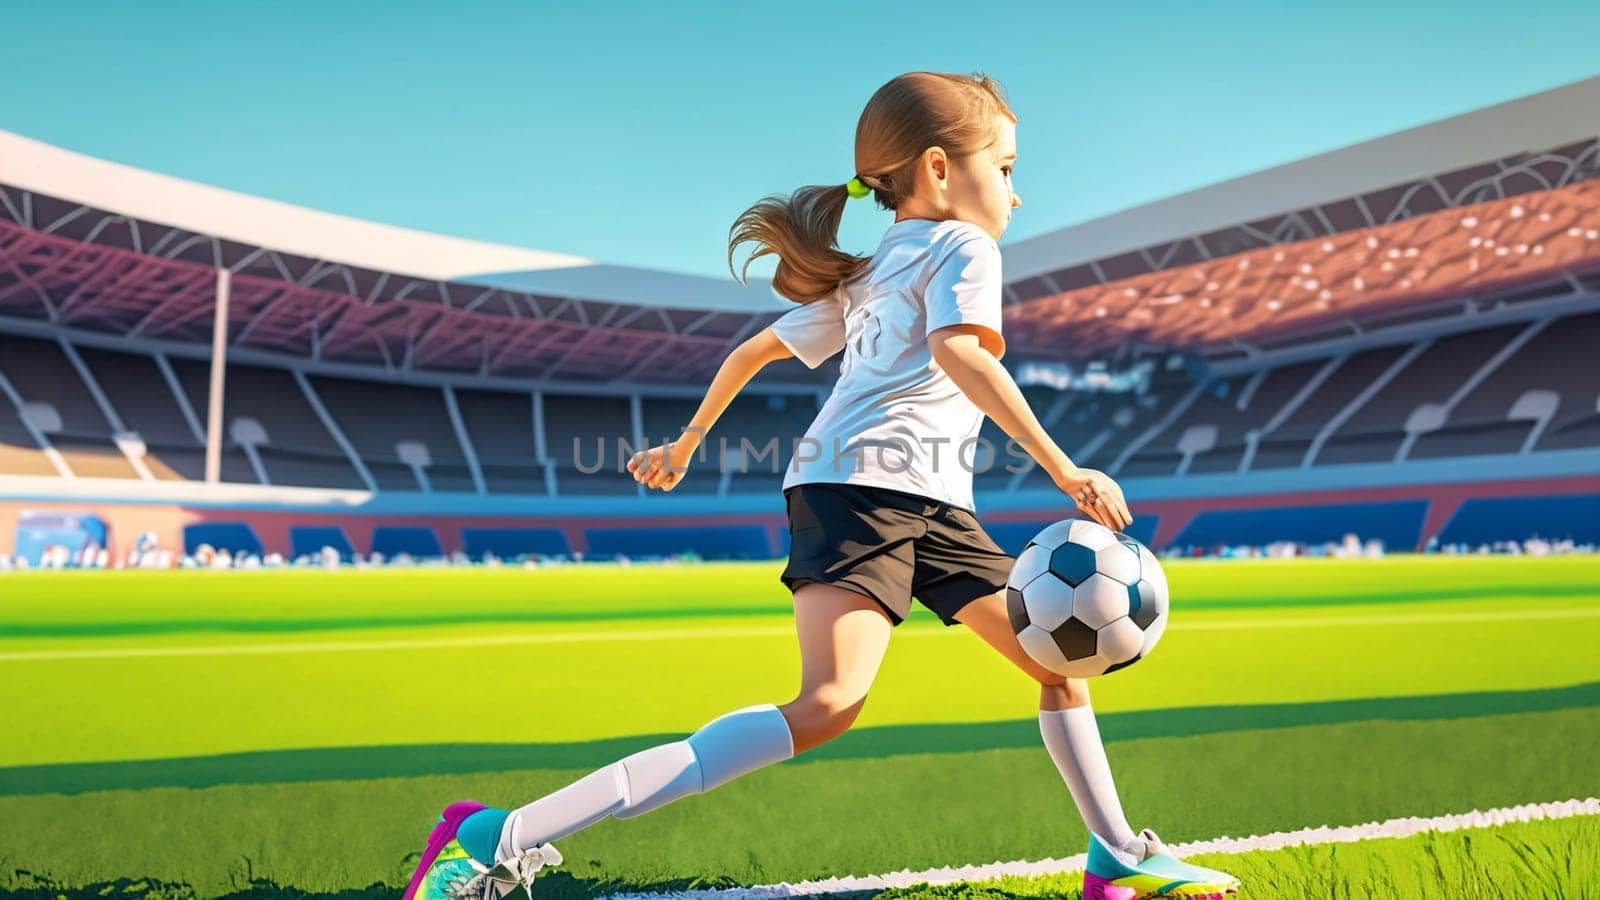 A young girl football player in colors of national germany football team plays with her feet a soccer ball. illustrations in cartoon style on sport stadium background for children by Costin